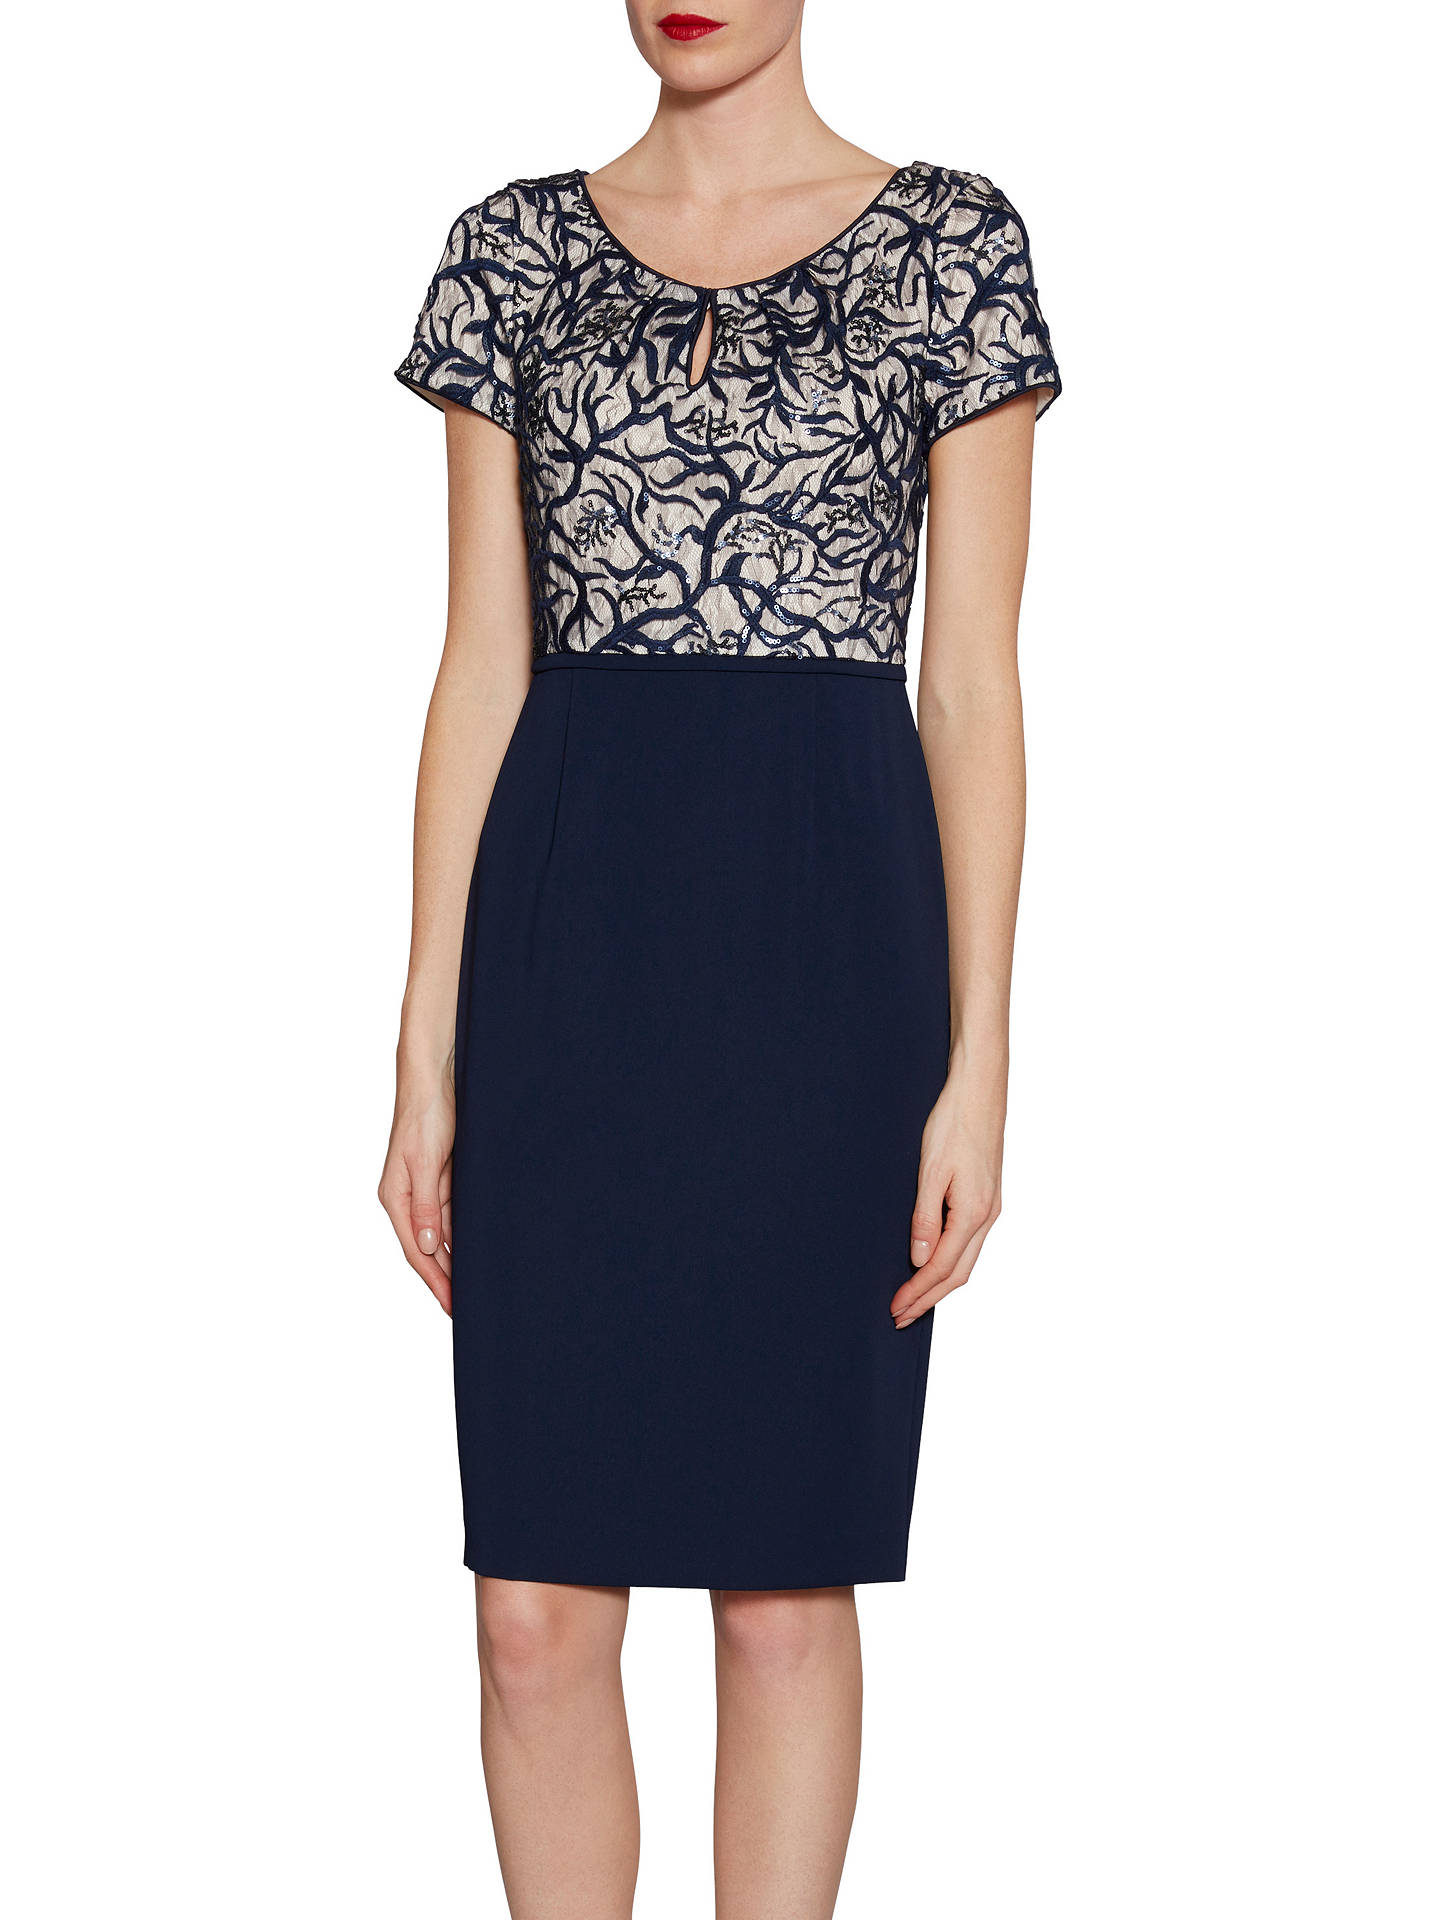 Gina Bacconi Embroidered Sequin Bodice Dress, Spring Navy at John Lewis